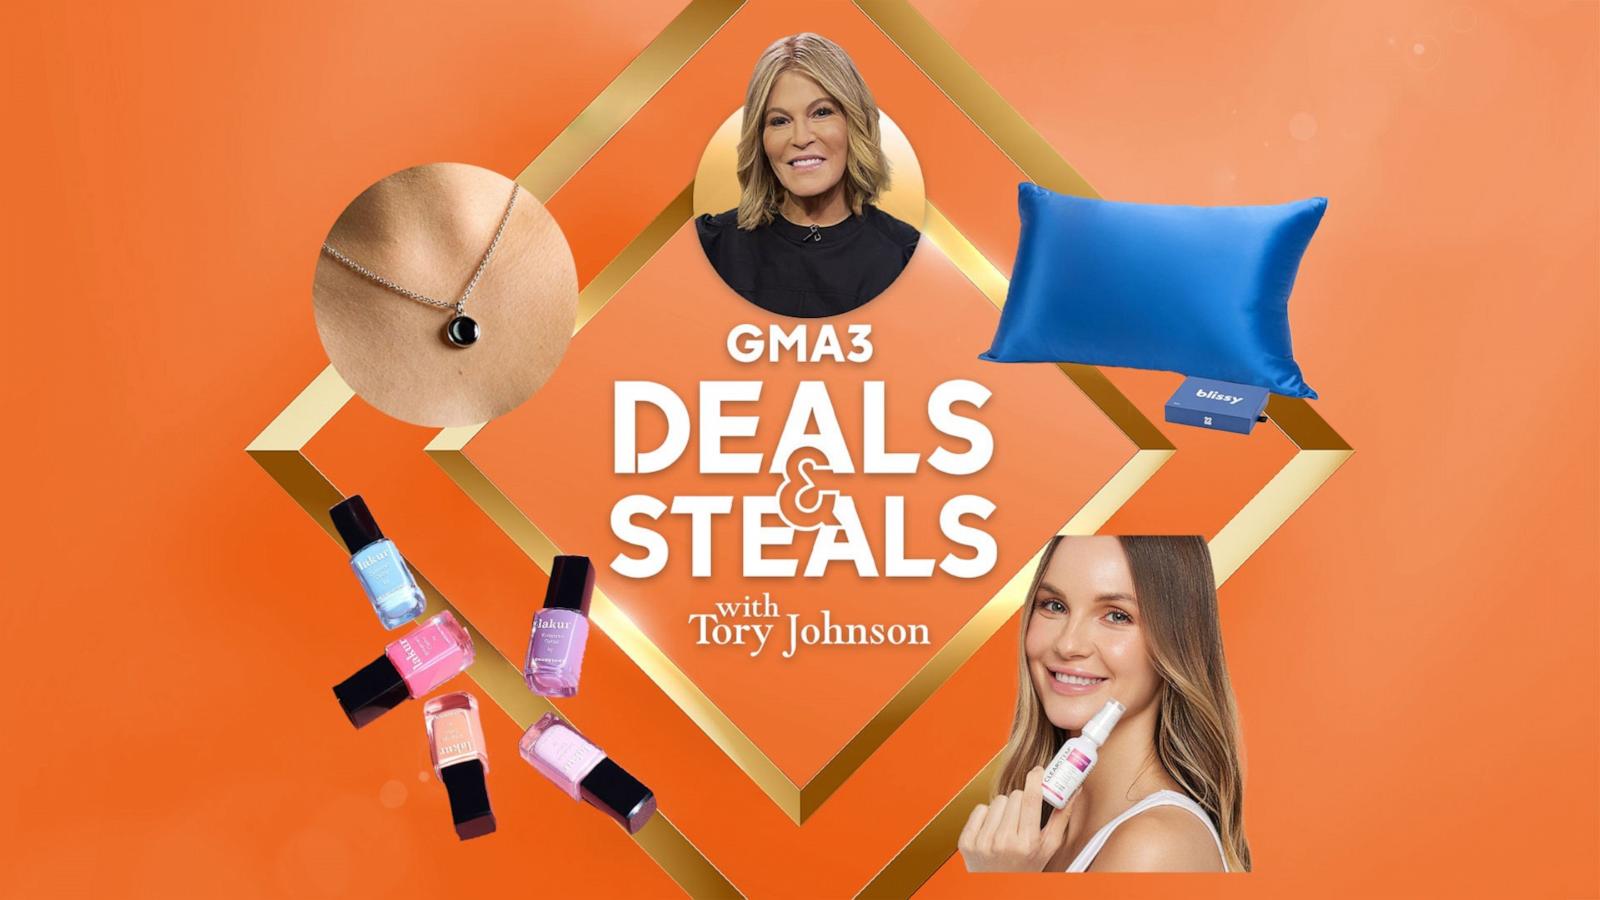 PHOTO: Deals & Steals to pamper yourself